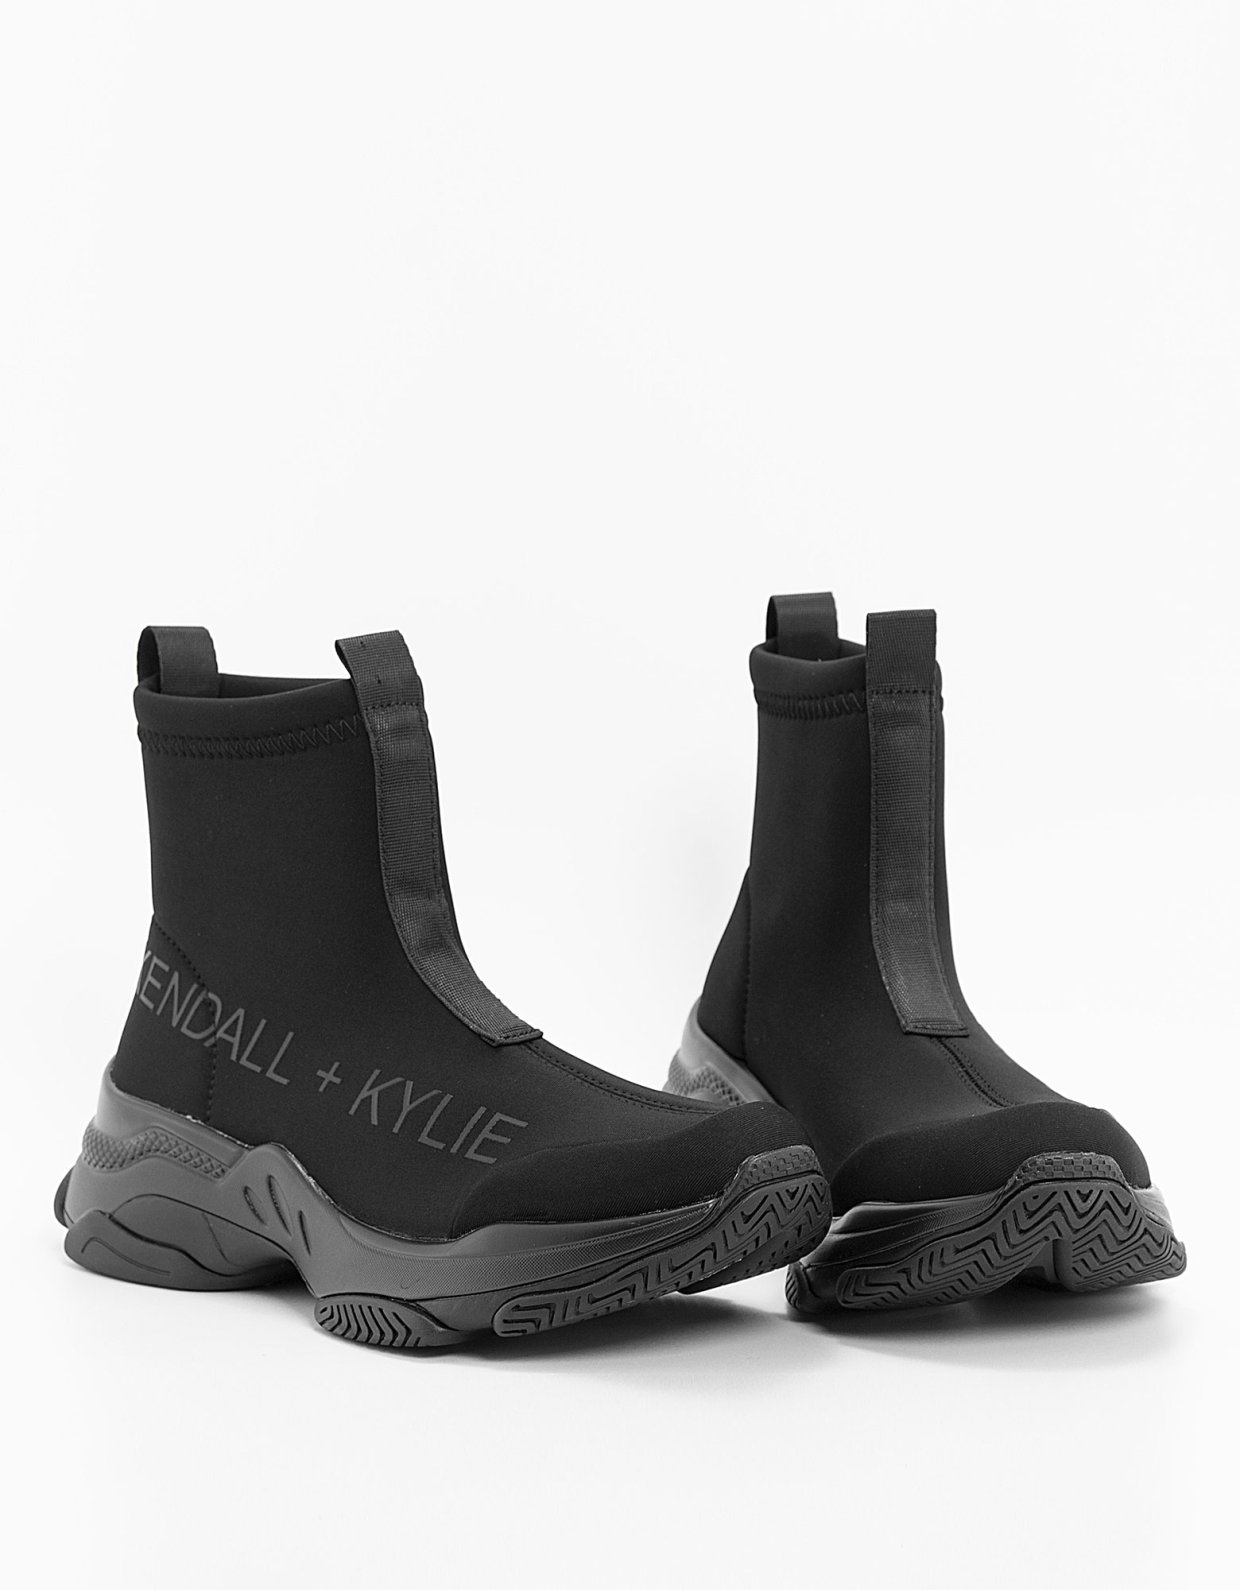 Kendall + Kylie Garin shoes black